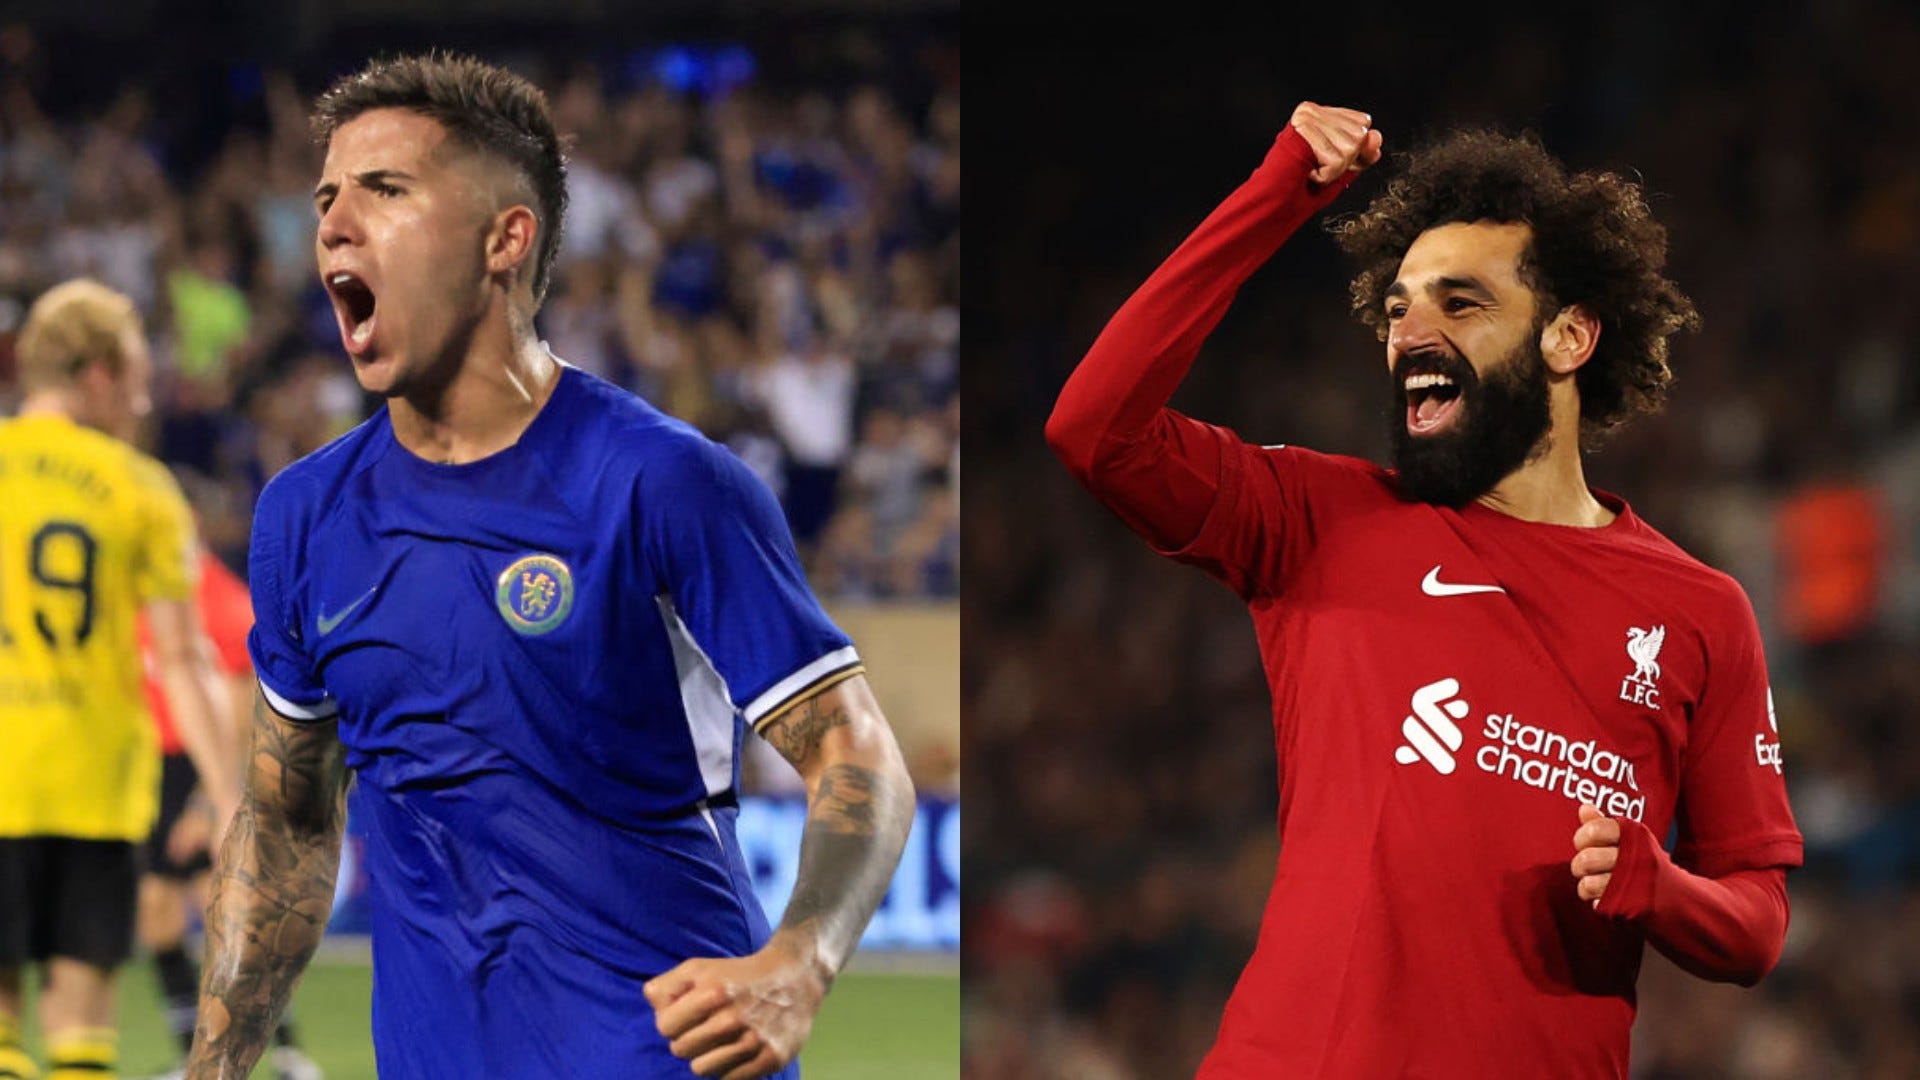 Chelsea vs Liverpool Where to watch the match online, live stream, TV channels, and kick-off time Goal US